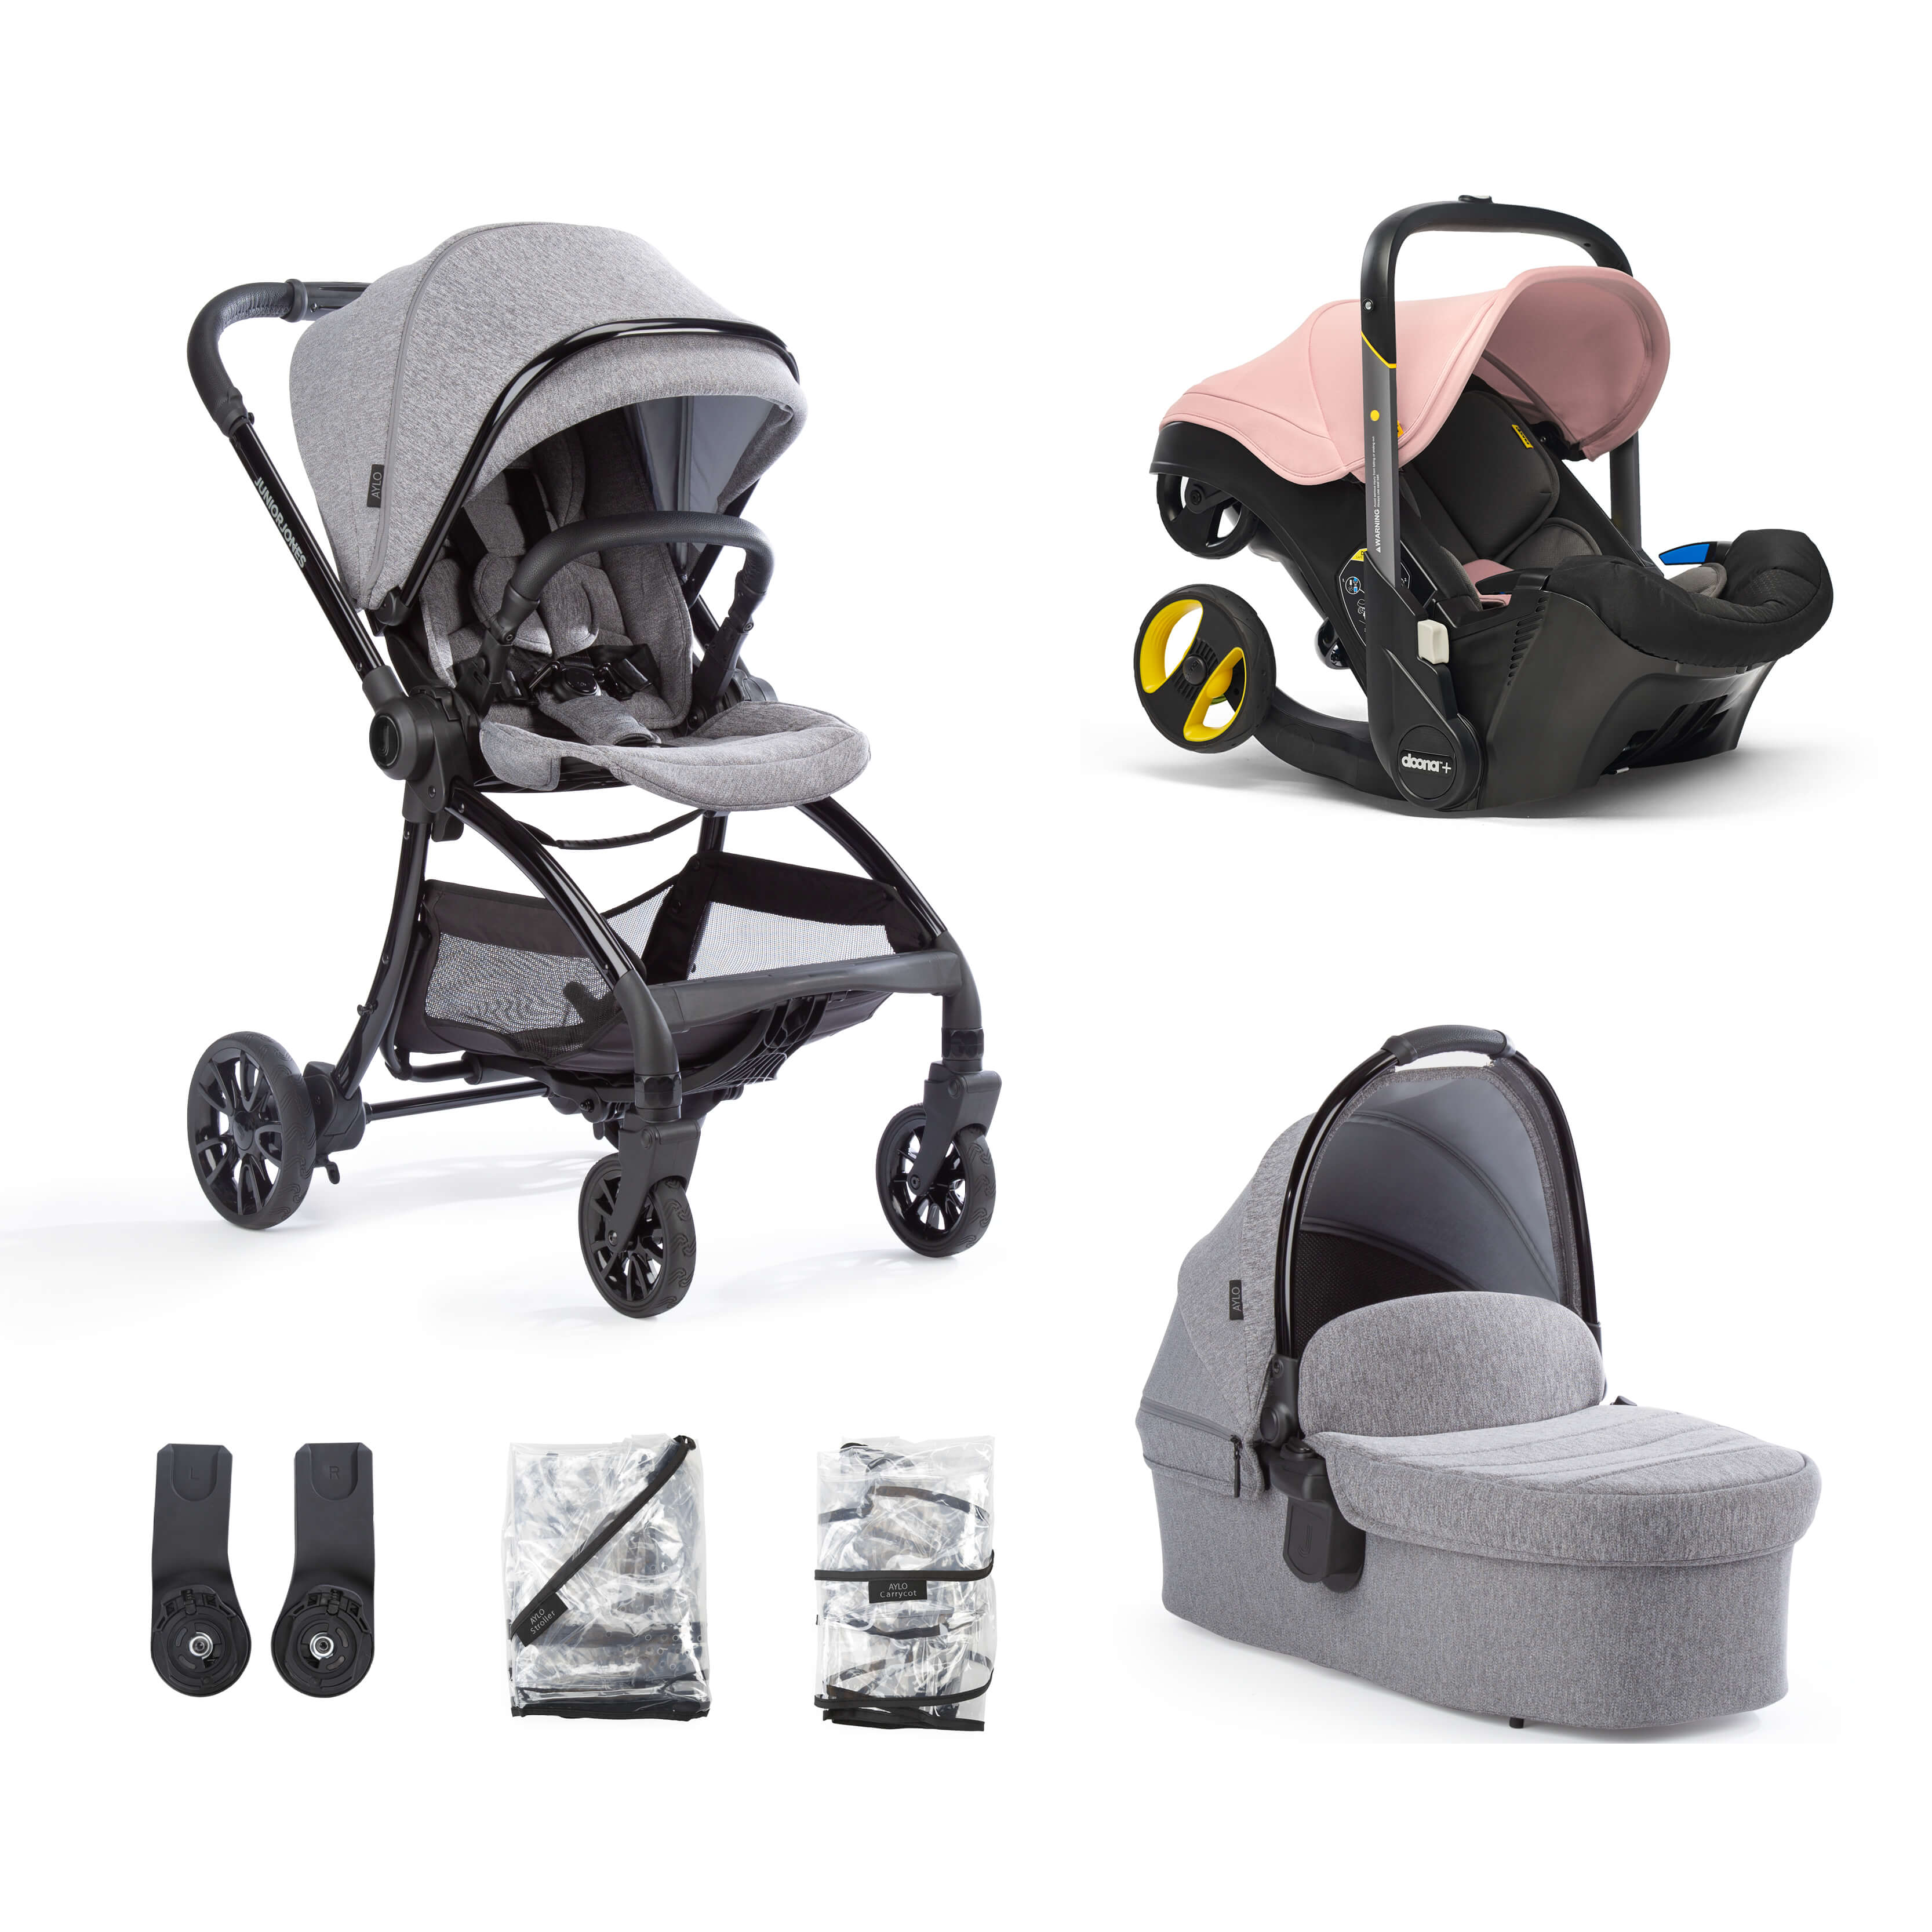 Simple Parenting Doona Review - Car Seats For The Littles